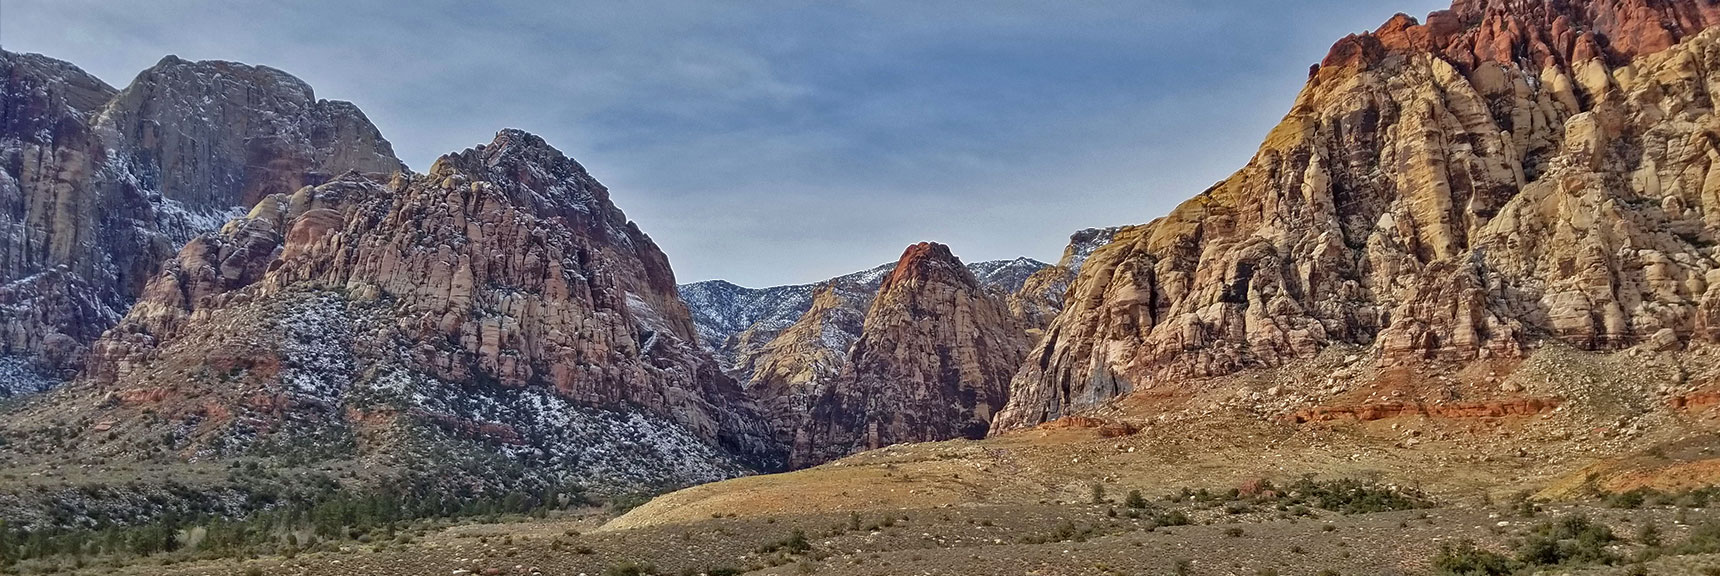 Red Rock National Park View of Pine Creek Canyon from Scenic Drive